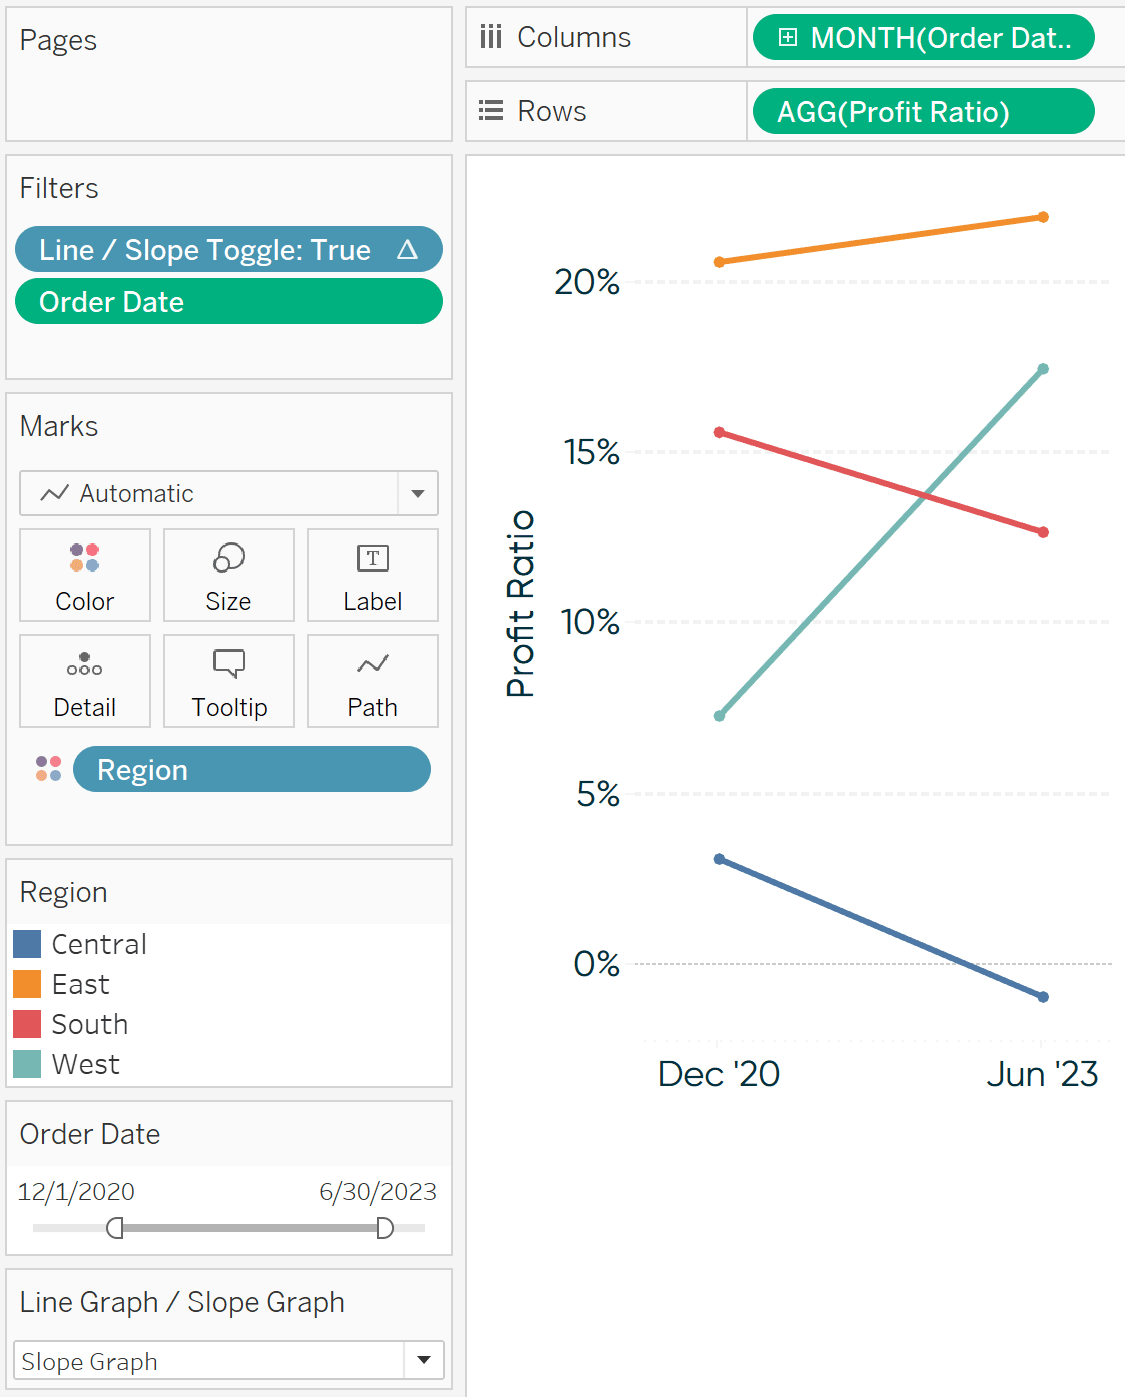 Fix the axis range on the slope graph